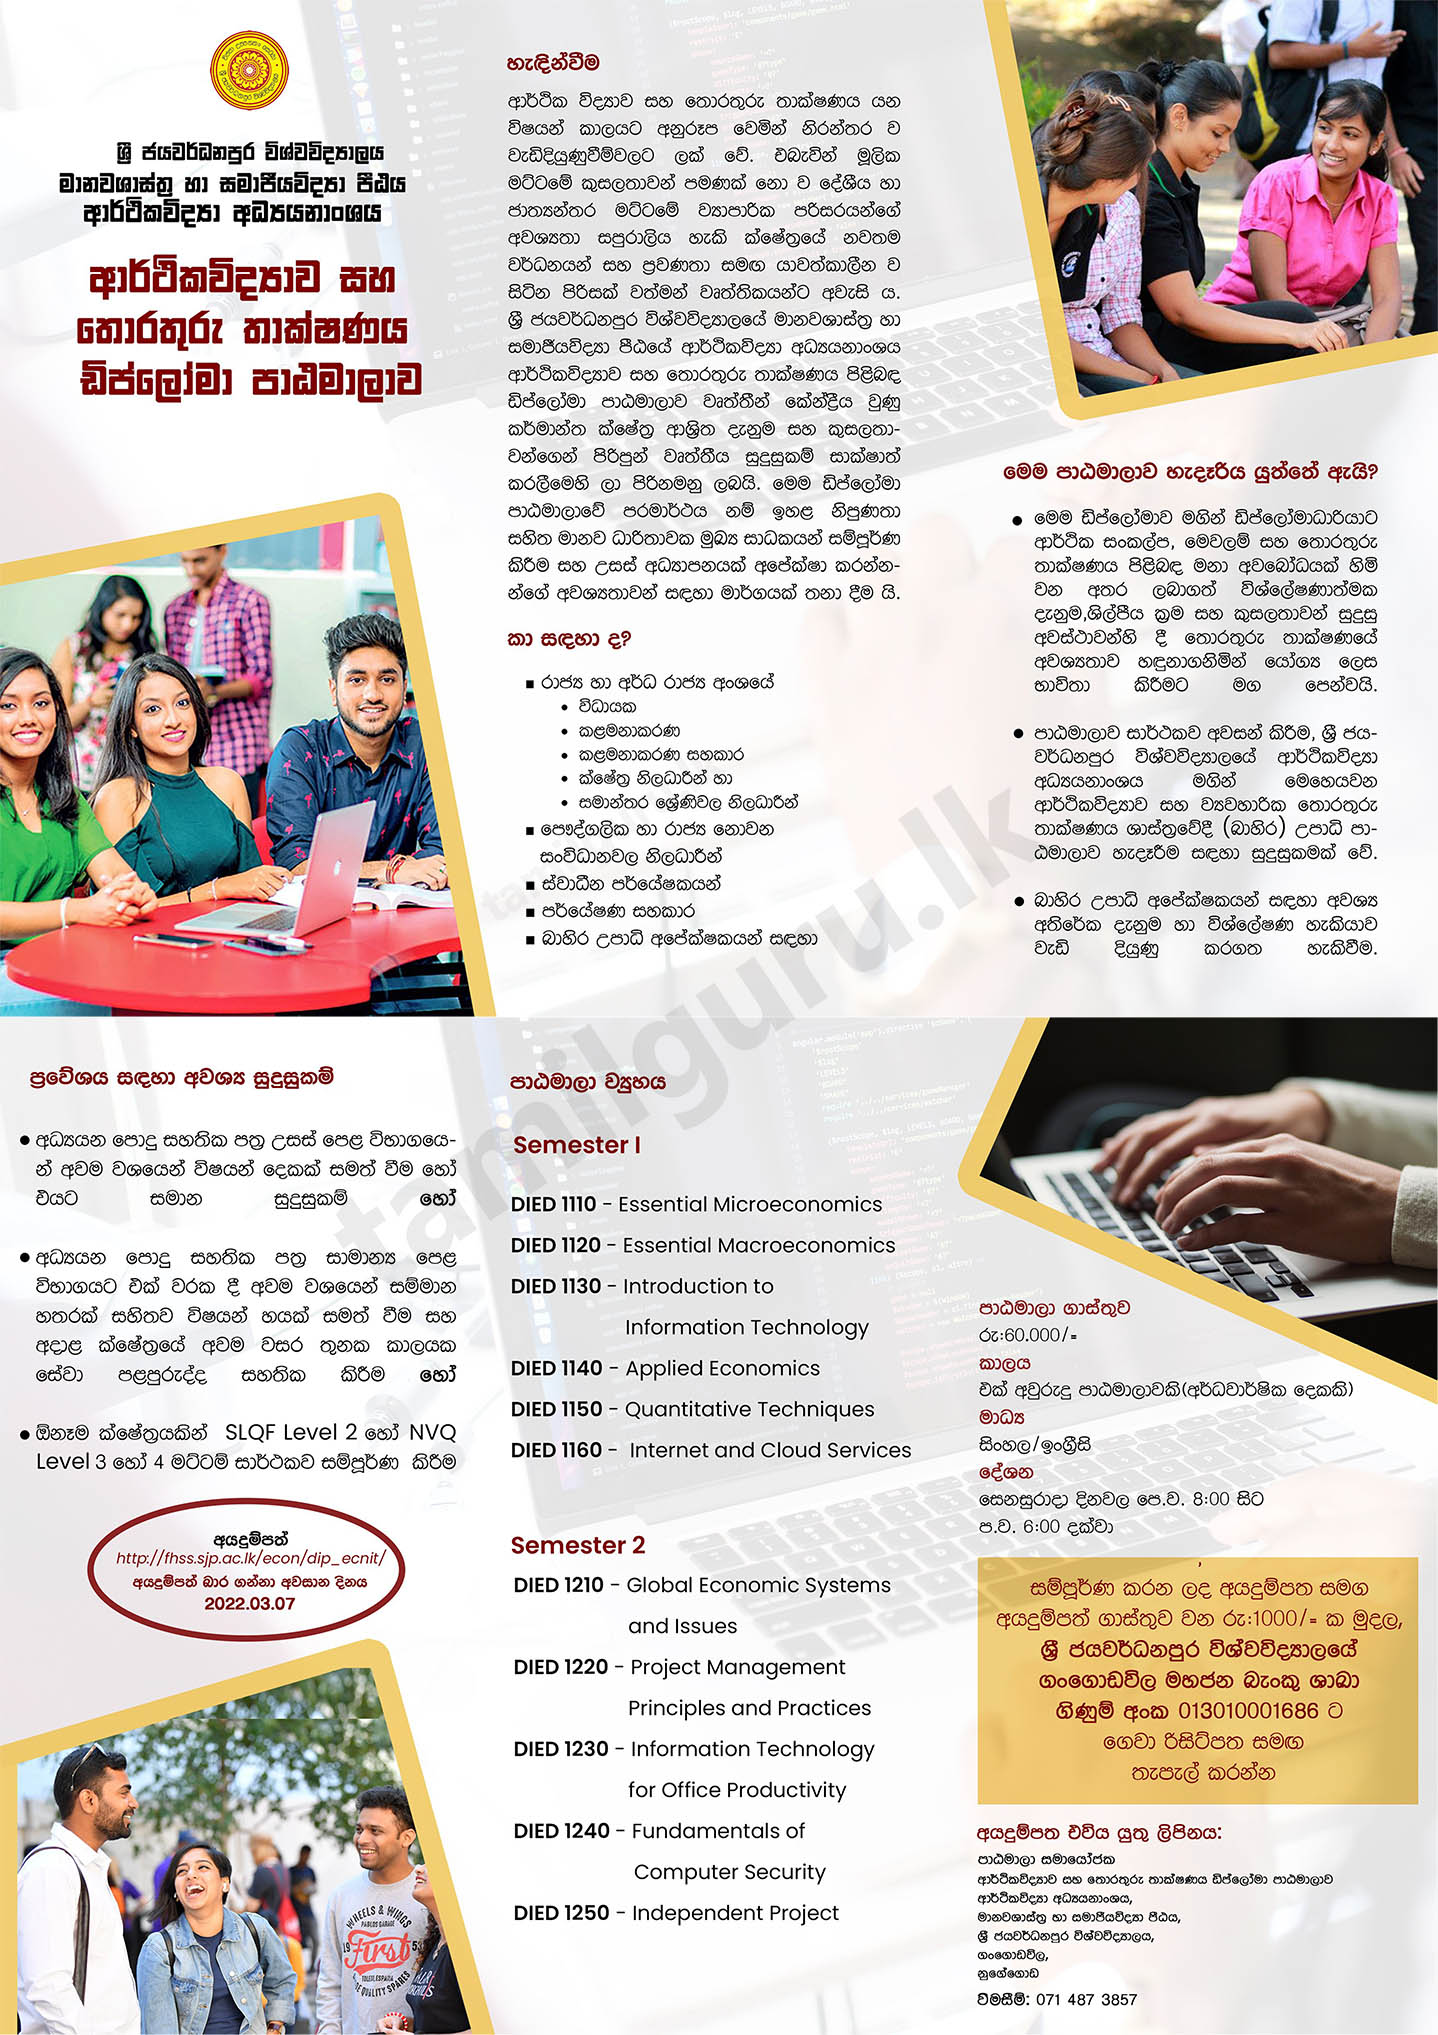 Calling Applications for Diploma in Economics and Information Technology Course - (2022) Conducted by the University of Sri Jayewardenepura - Sinhala Notice